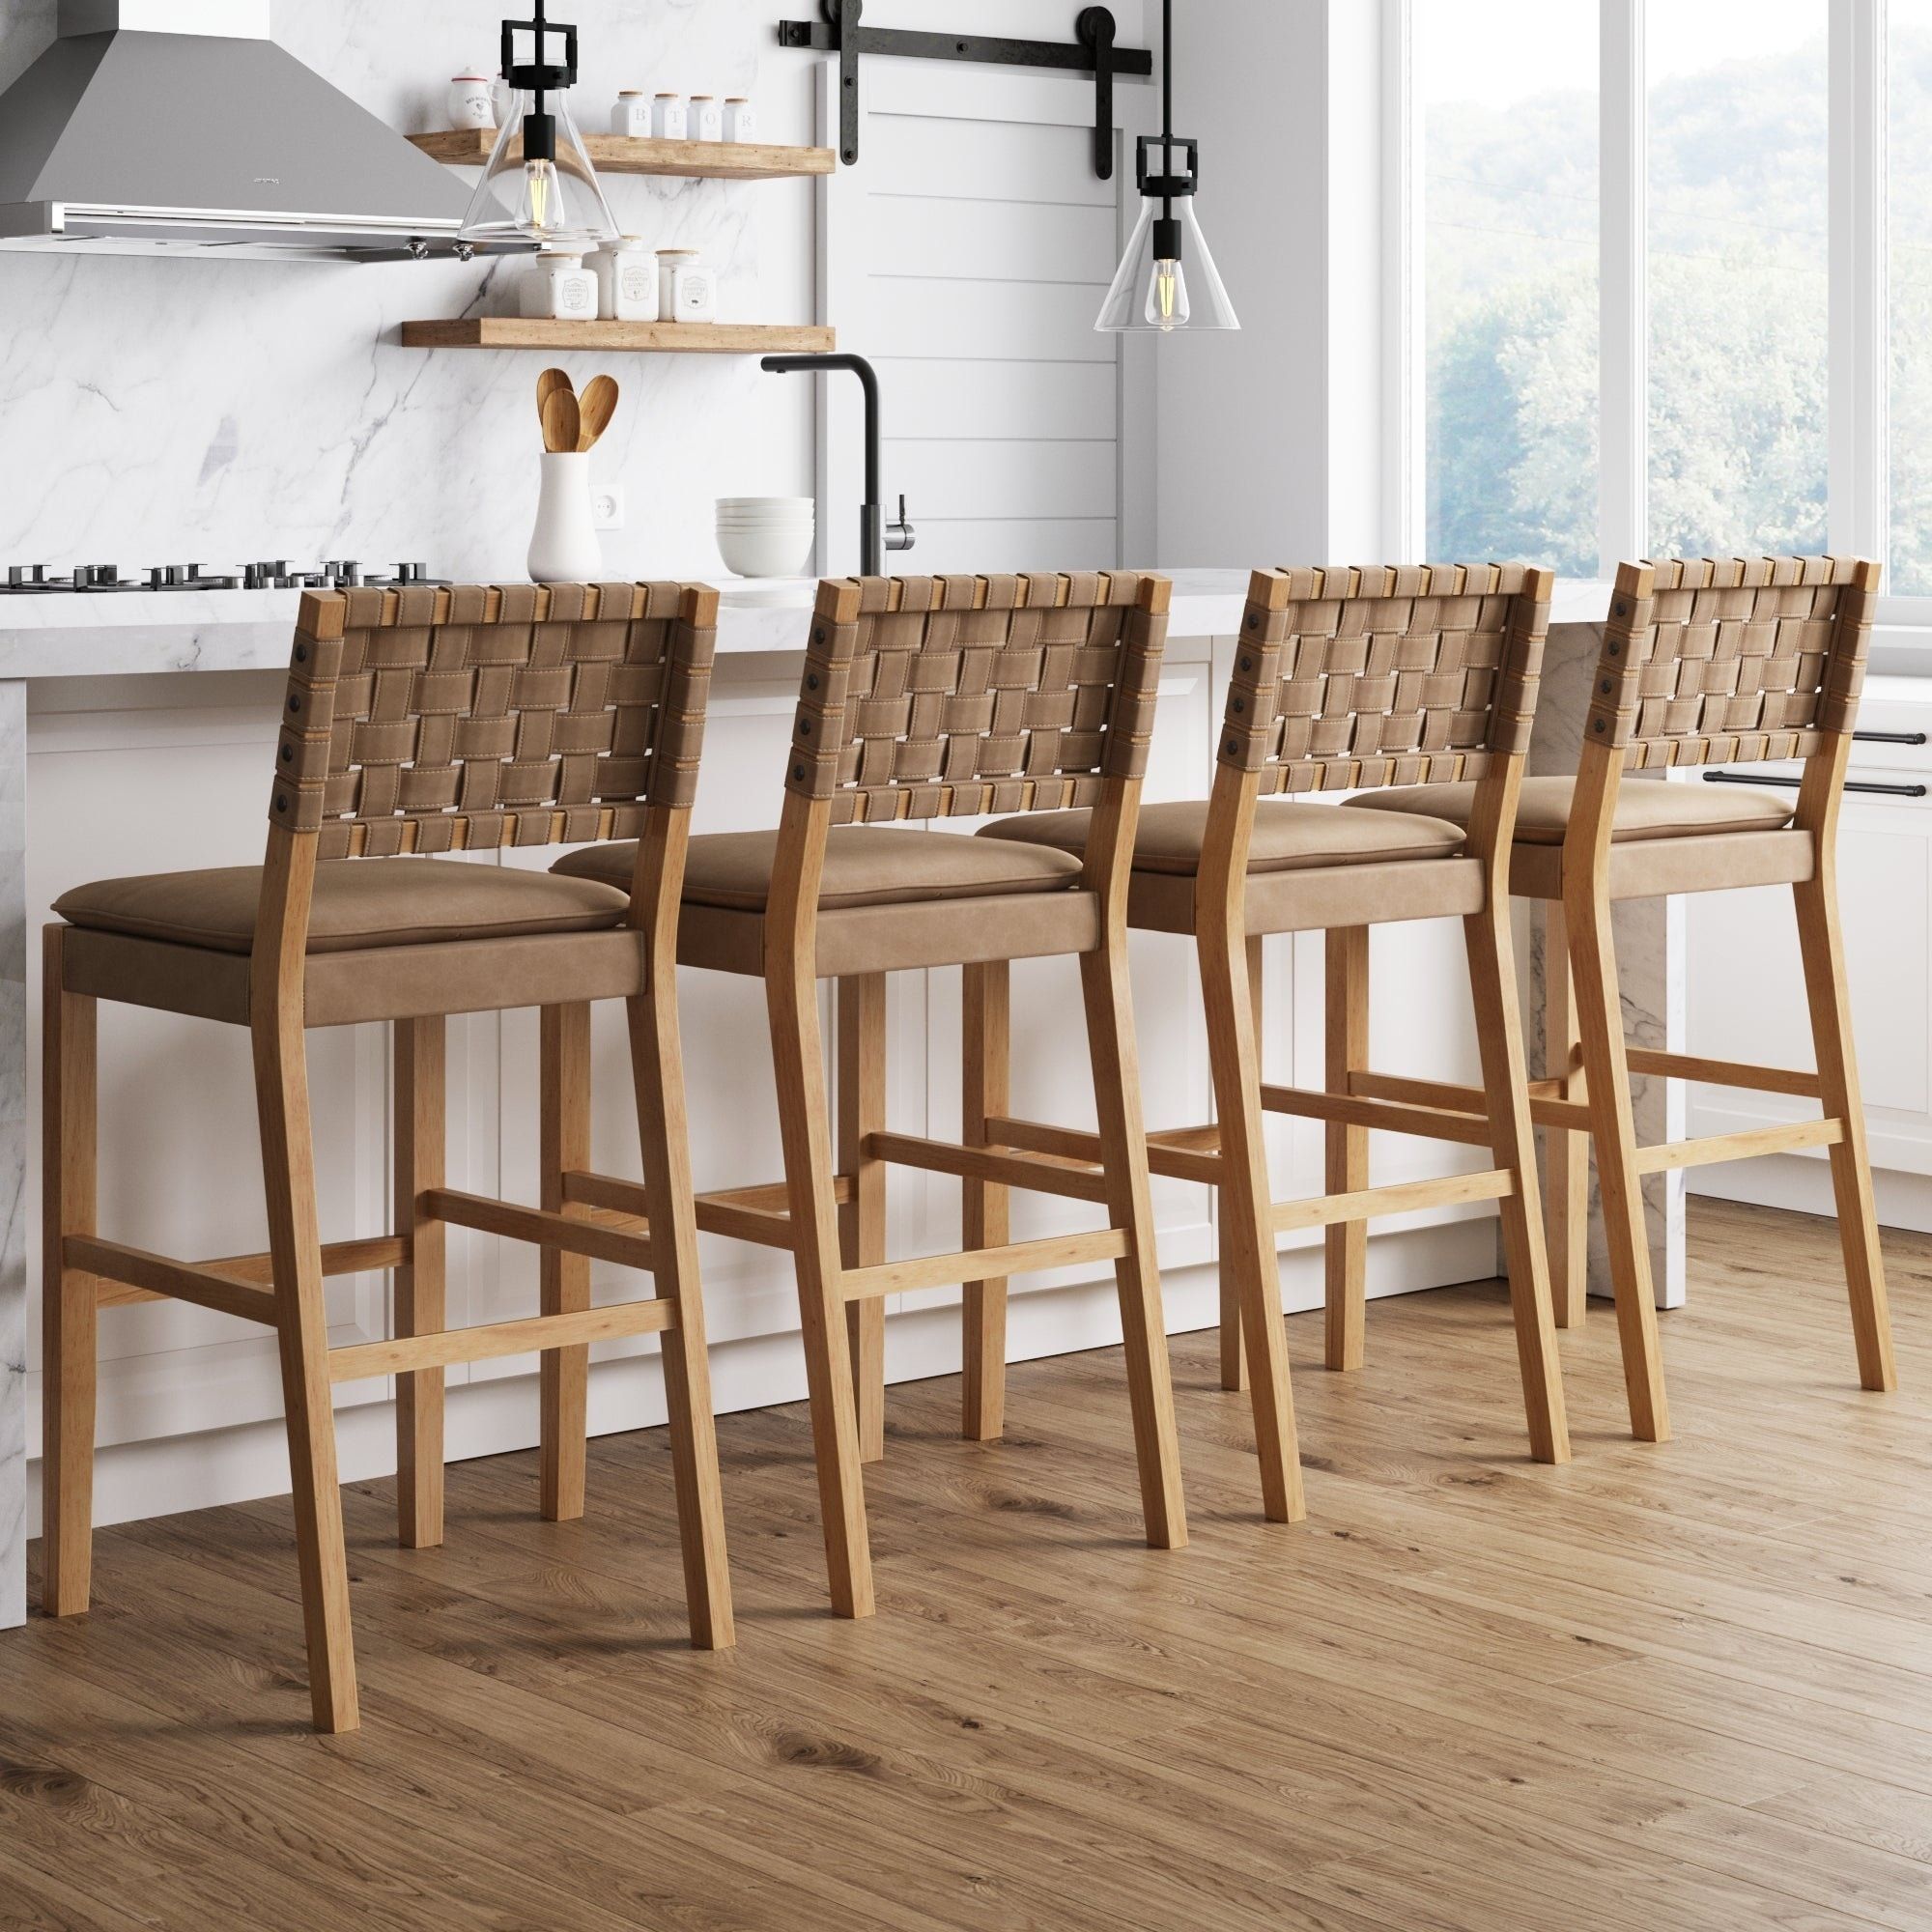 Elevate Your Dining Experience: The Benefits of Counter Height Chairs